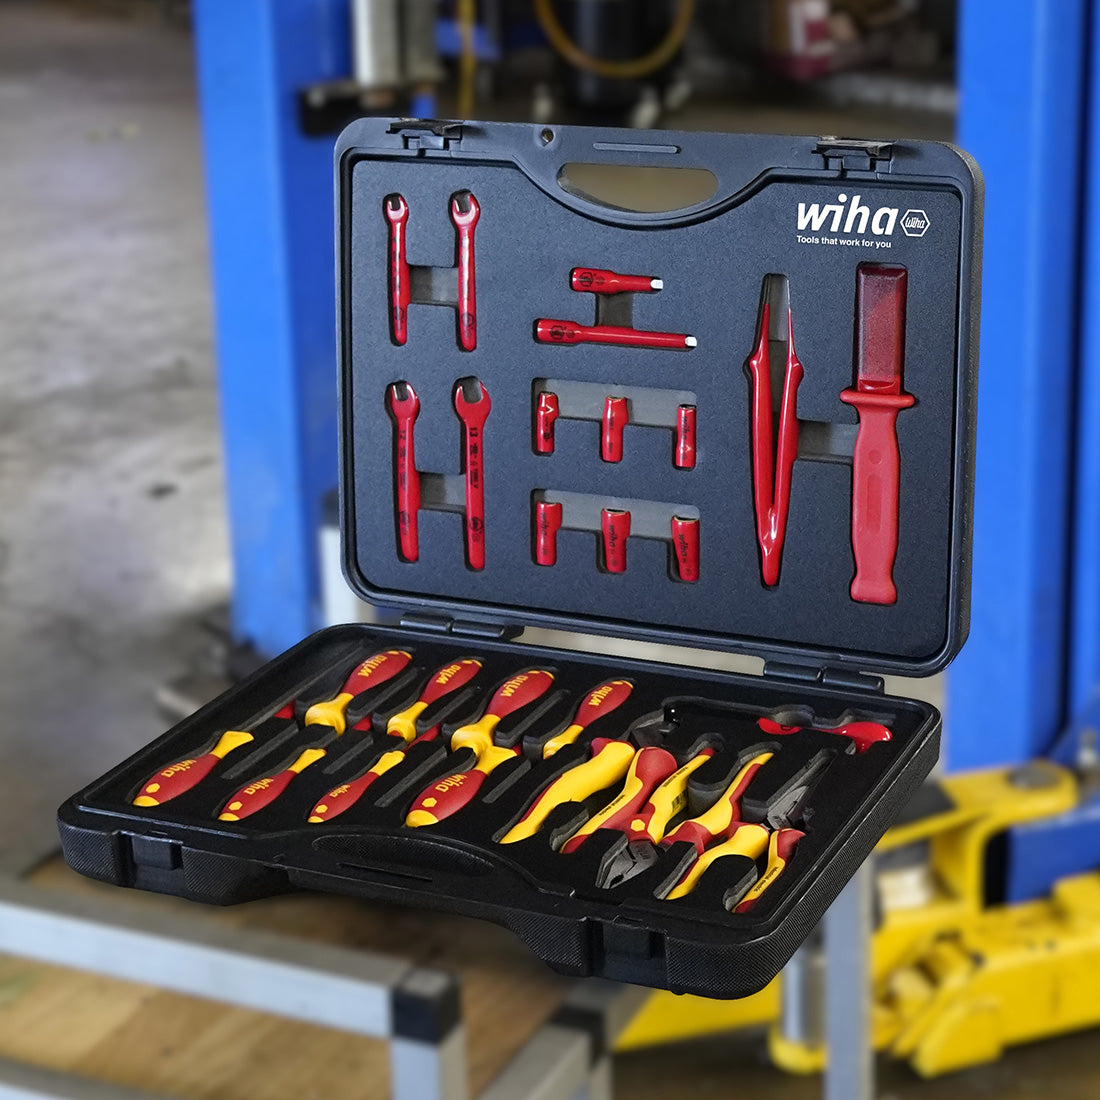 Wiha 91803 15 Piece Insulated Tool Kit with HIKMICRO Thermal Inspection Camera